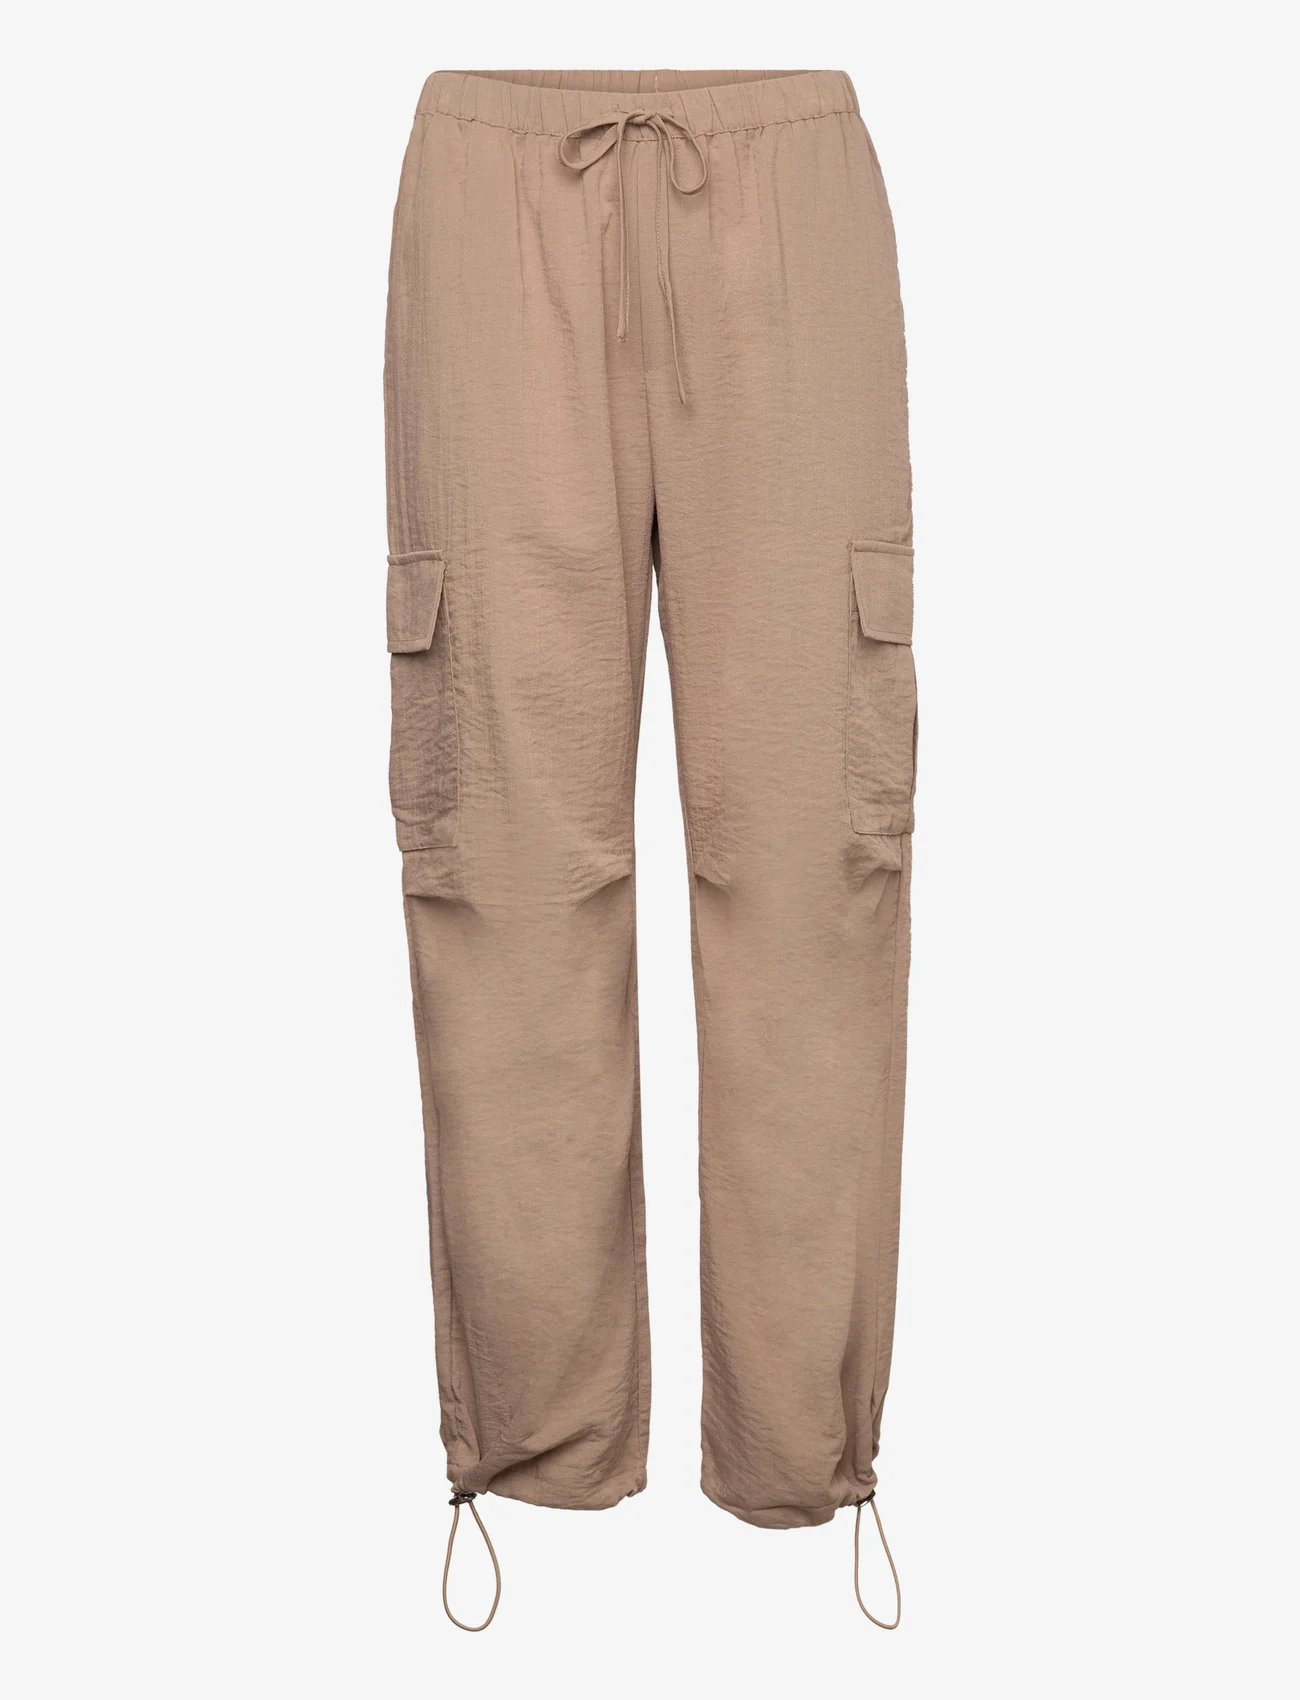 FREE/QUENT - FQEVERYDAY-PANT - cargo pants - desert taupe - 0